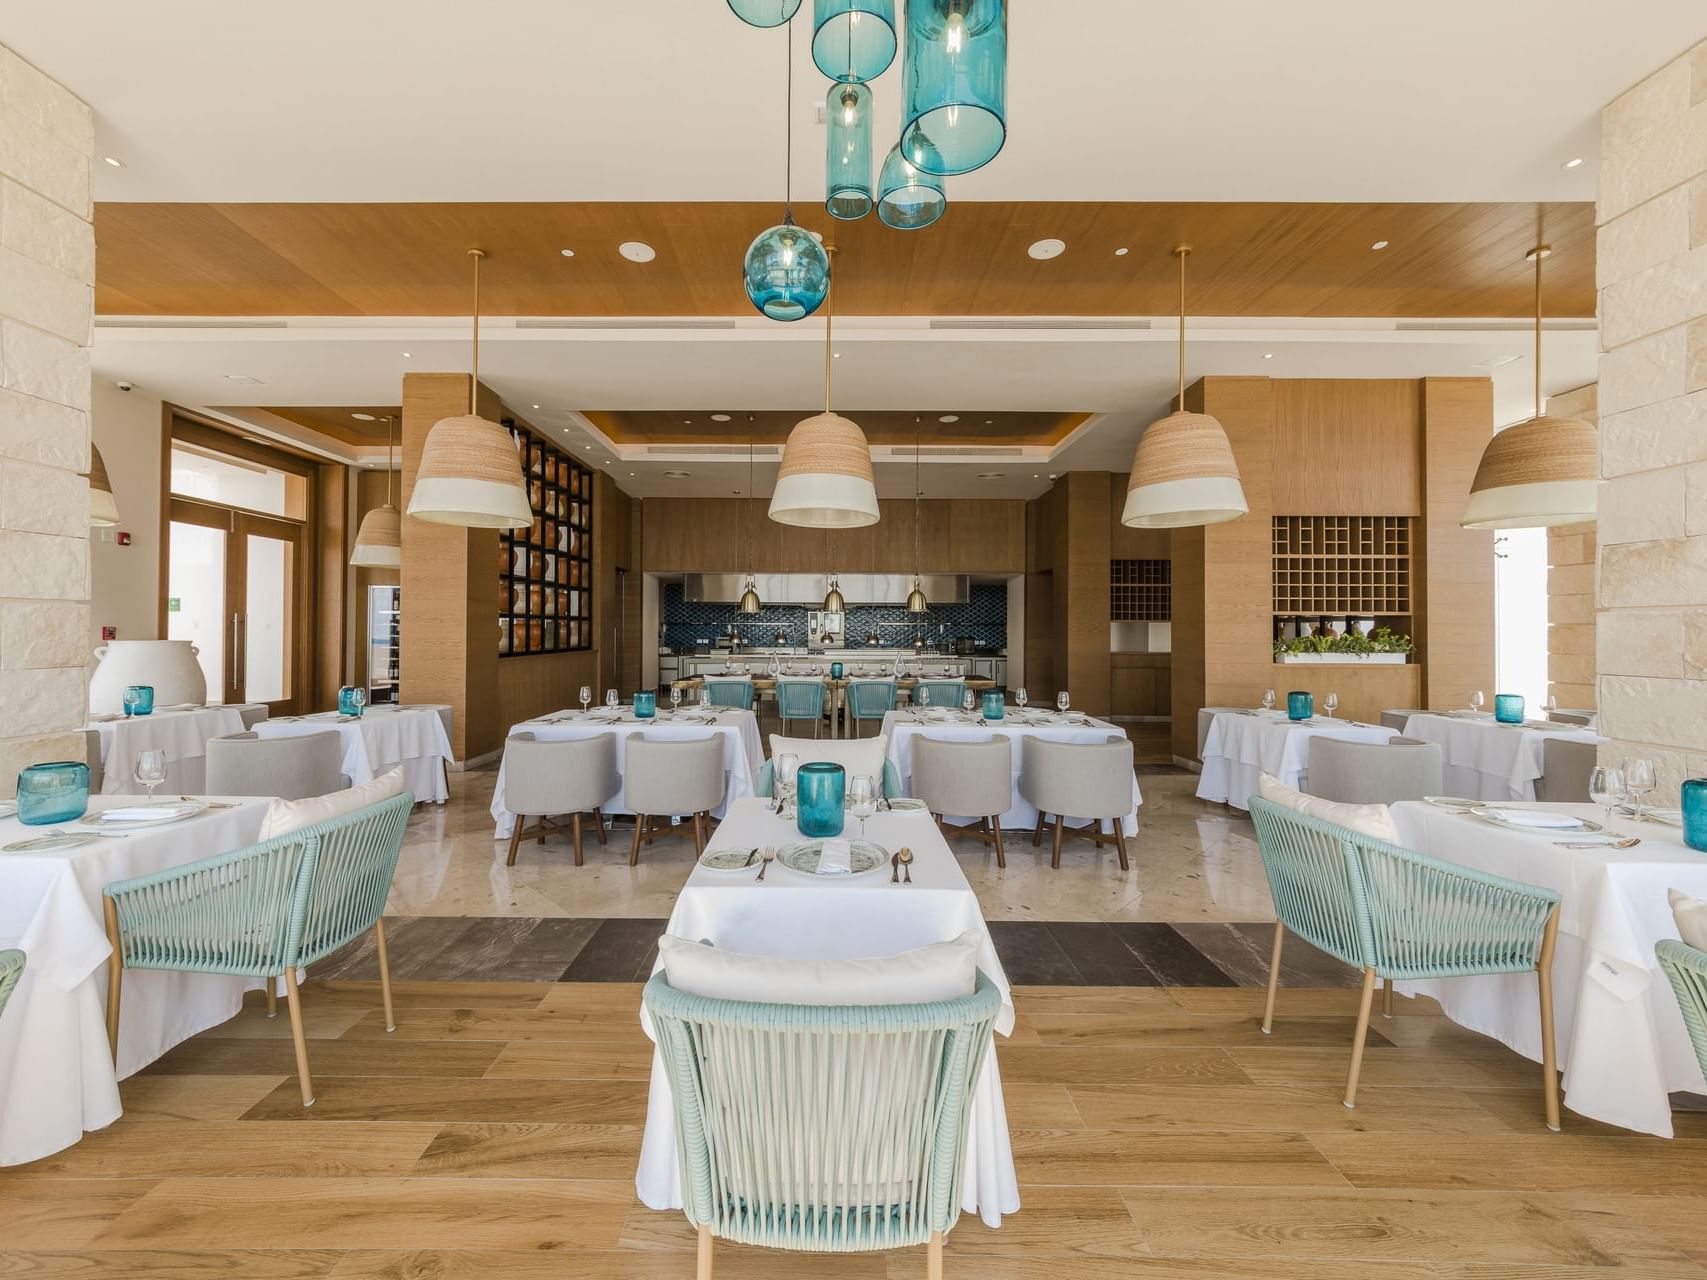 Restaurant-style dining set-up at Olios restaurant at Haven Riviera Cancun